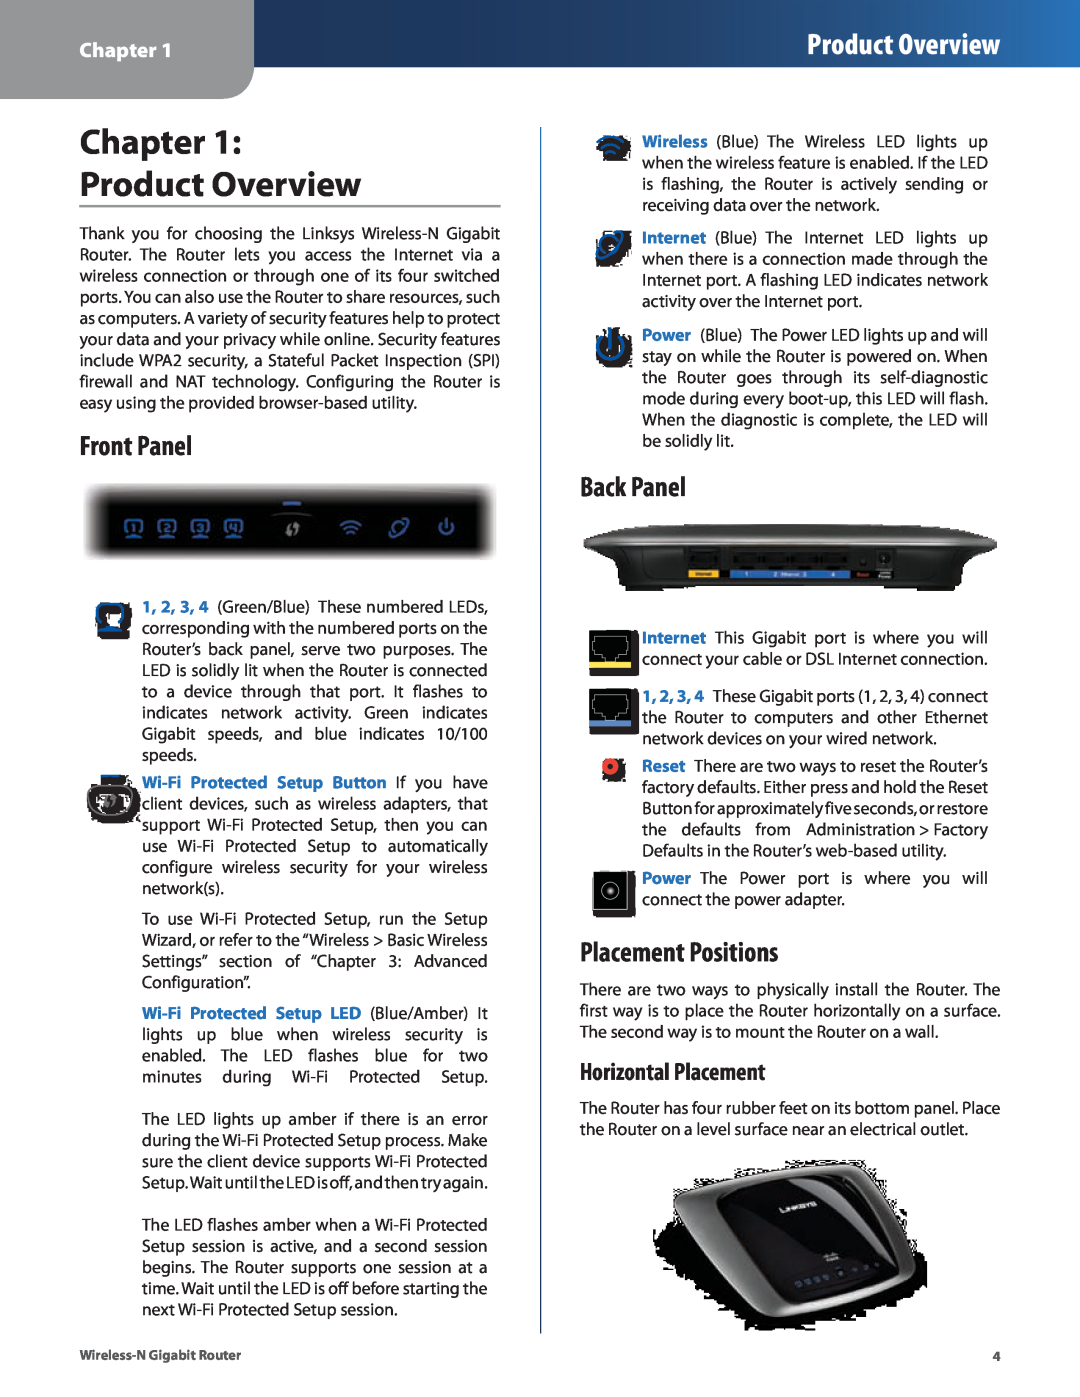 Linksys WRT310N manual Chapter Product Overview, Front Panel, Back Panel, Placement Positions, Horizontal Placement 